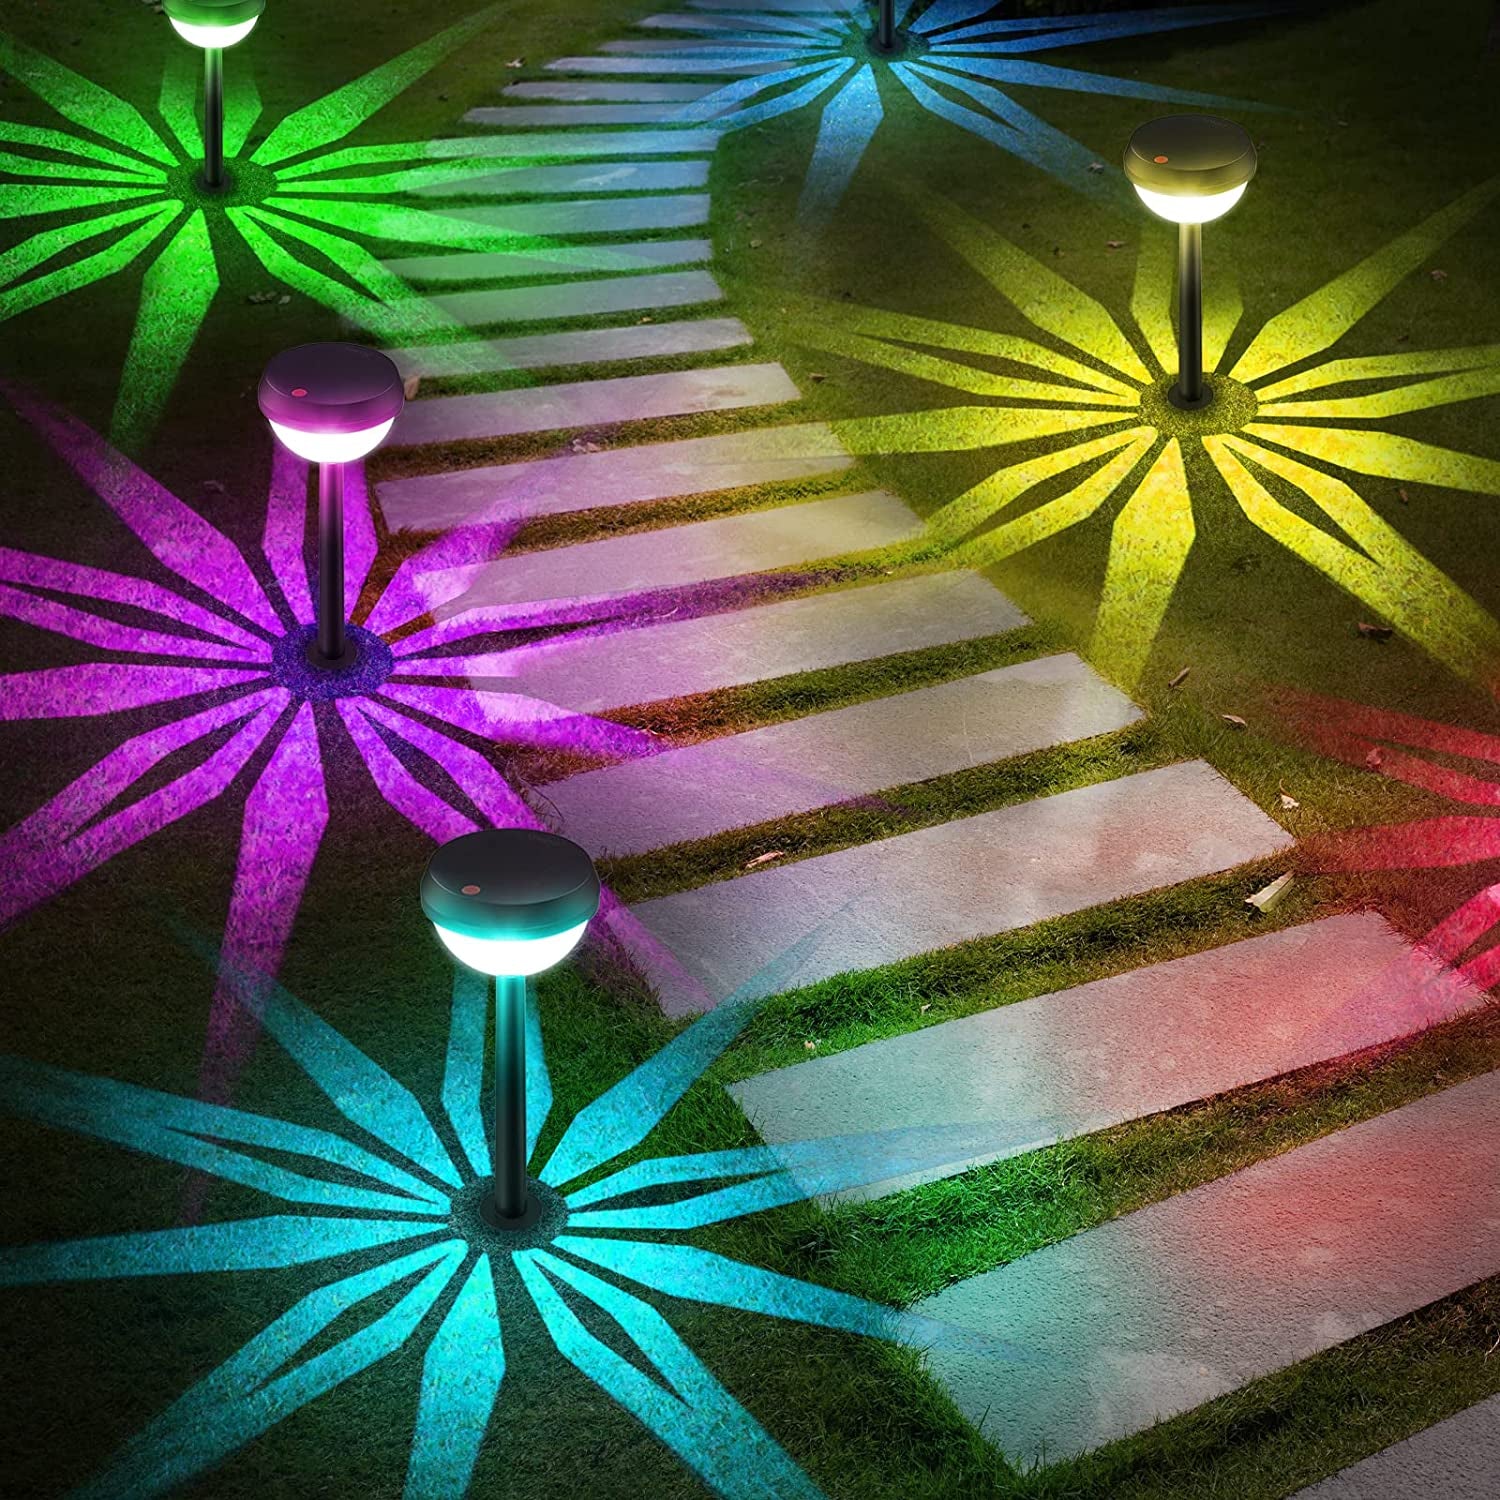 Linkind, Linkind Solar Pathway Lights 8 Pack, Color Changing Bright Solar Outdoor Lights, Waterproof Landscape Path Lights, Solar Powered Garden Lights for Walkway Backyard Lawn Driveway Porch Decor